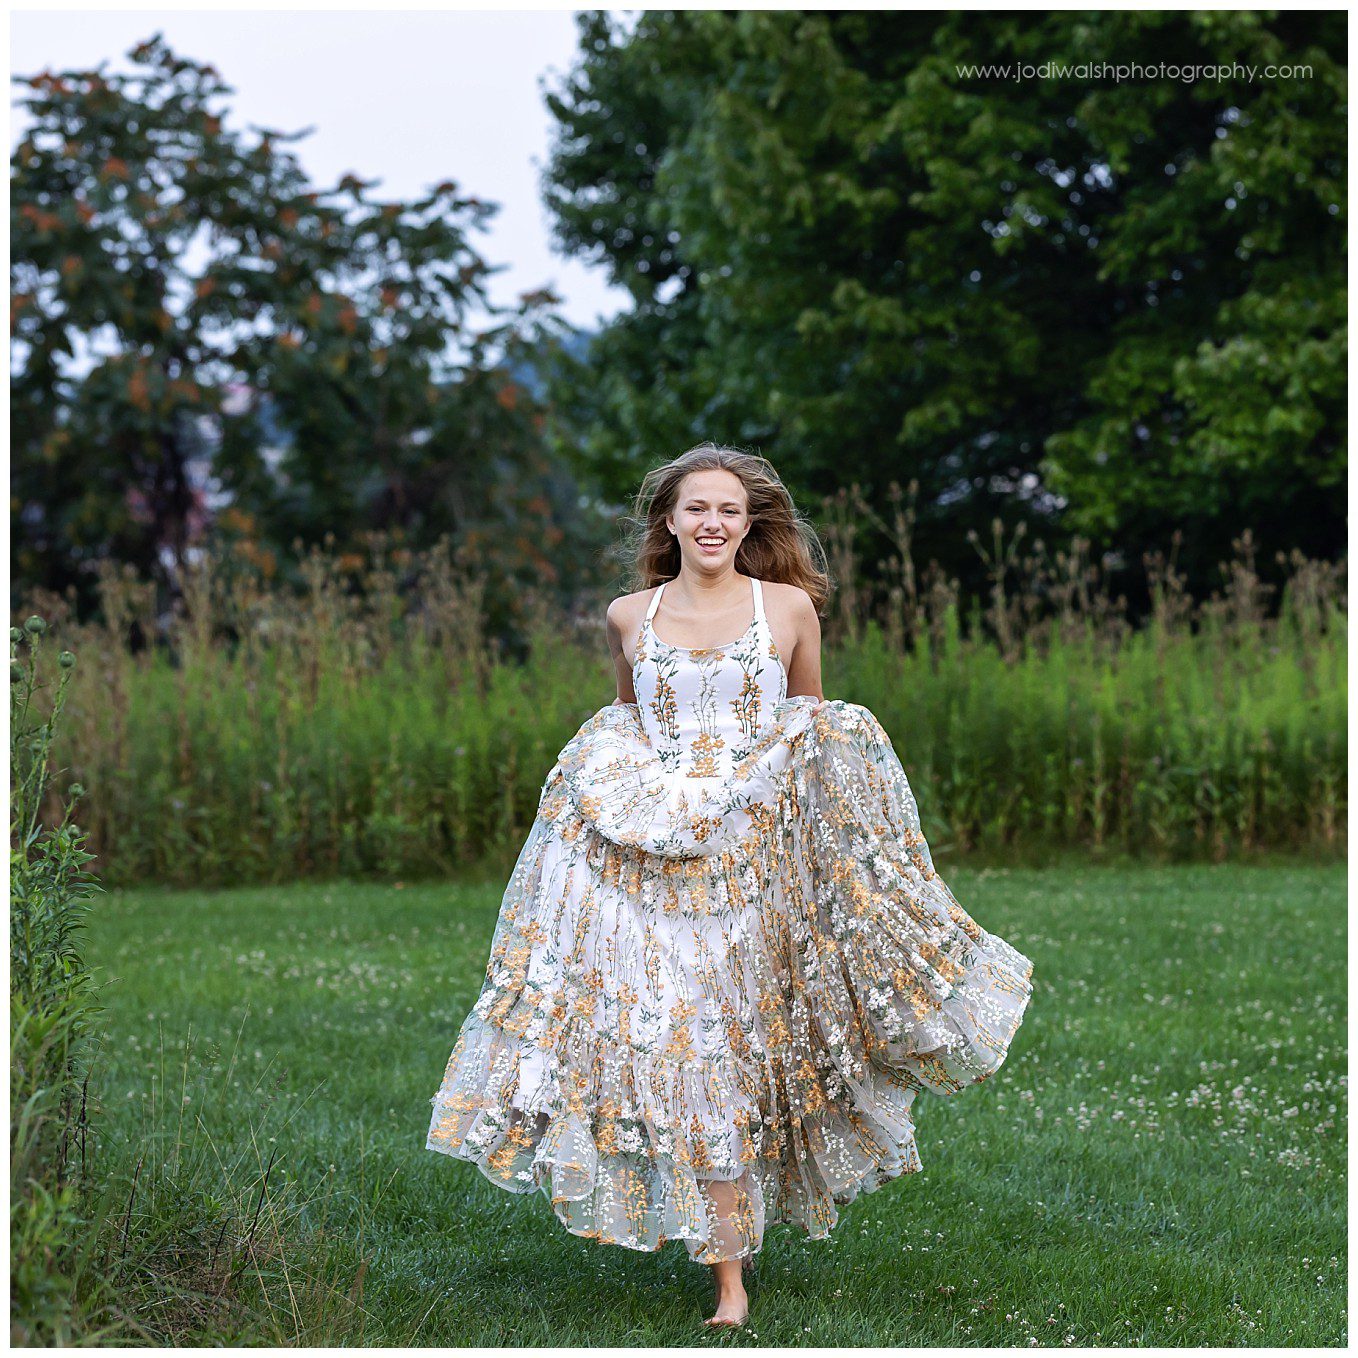 image of a senior girl running in a field and wearing a couture gown. She has long blond hair that is down and flowing behind her.